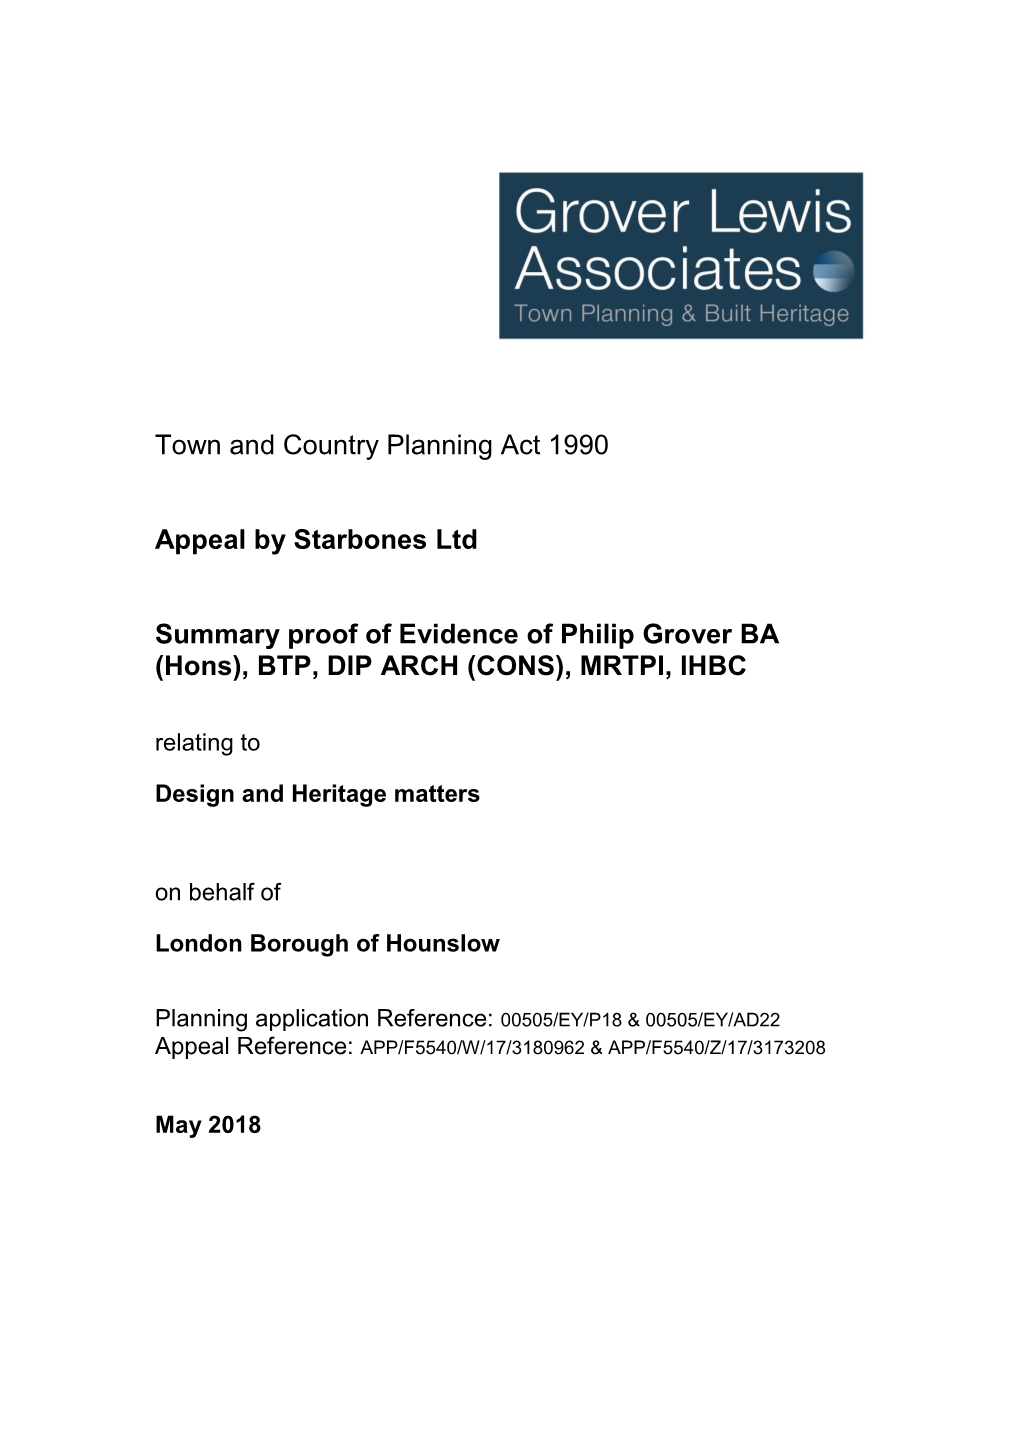 Town and Country Planning Act 1990 Appeal by Starbones Ltd